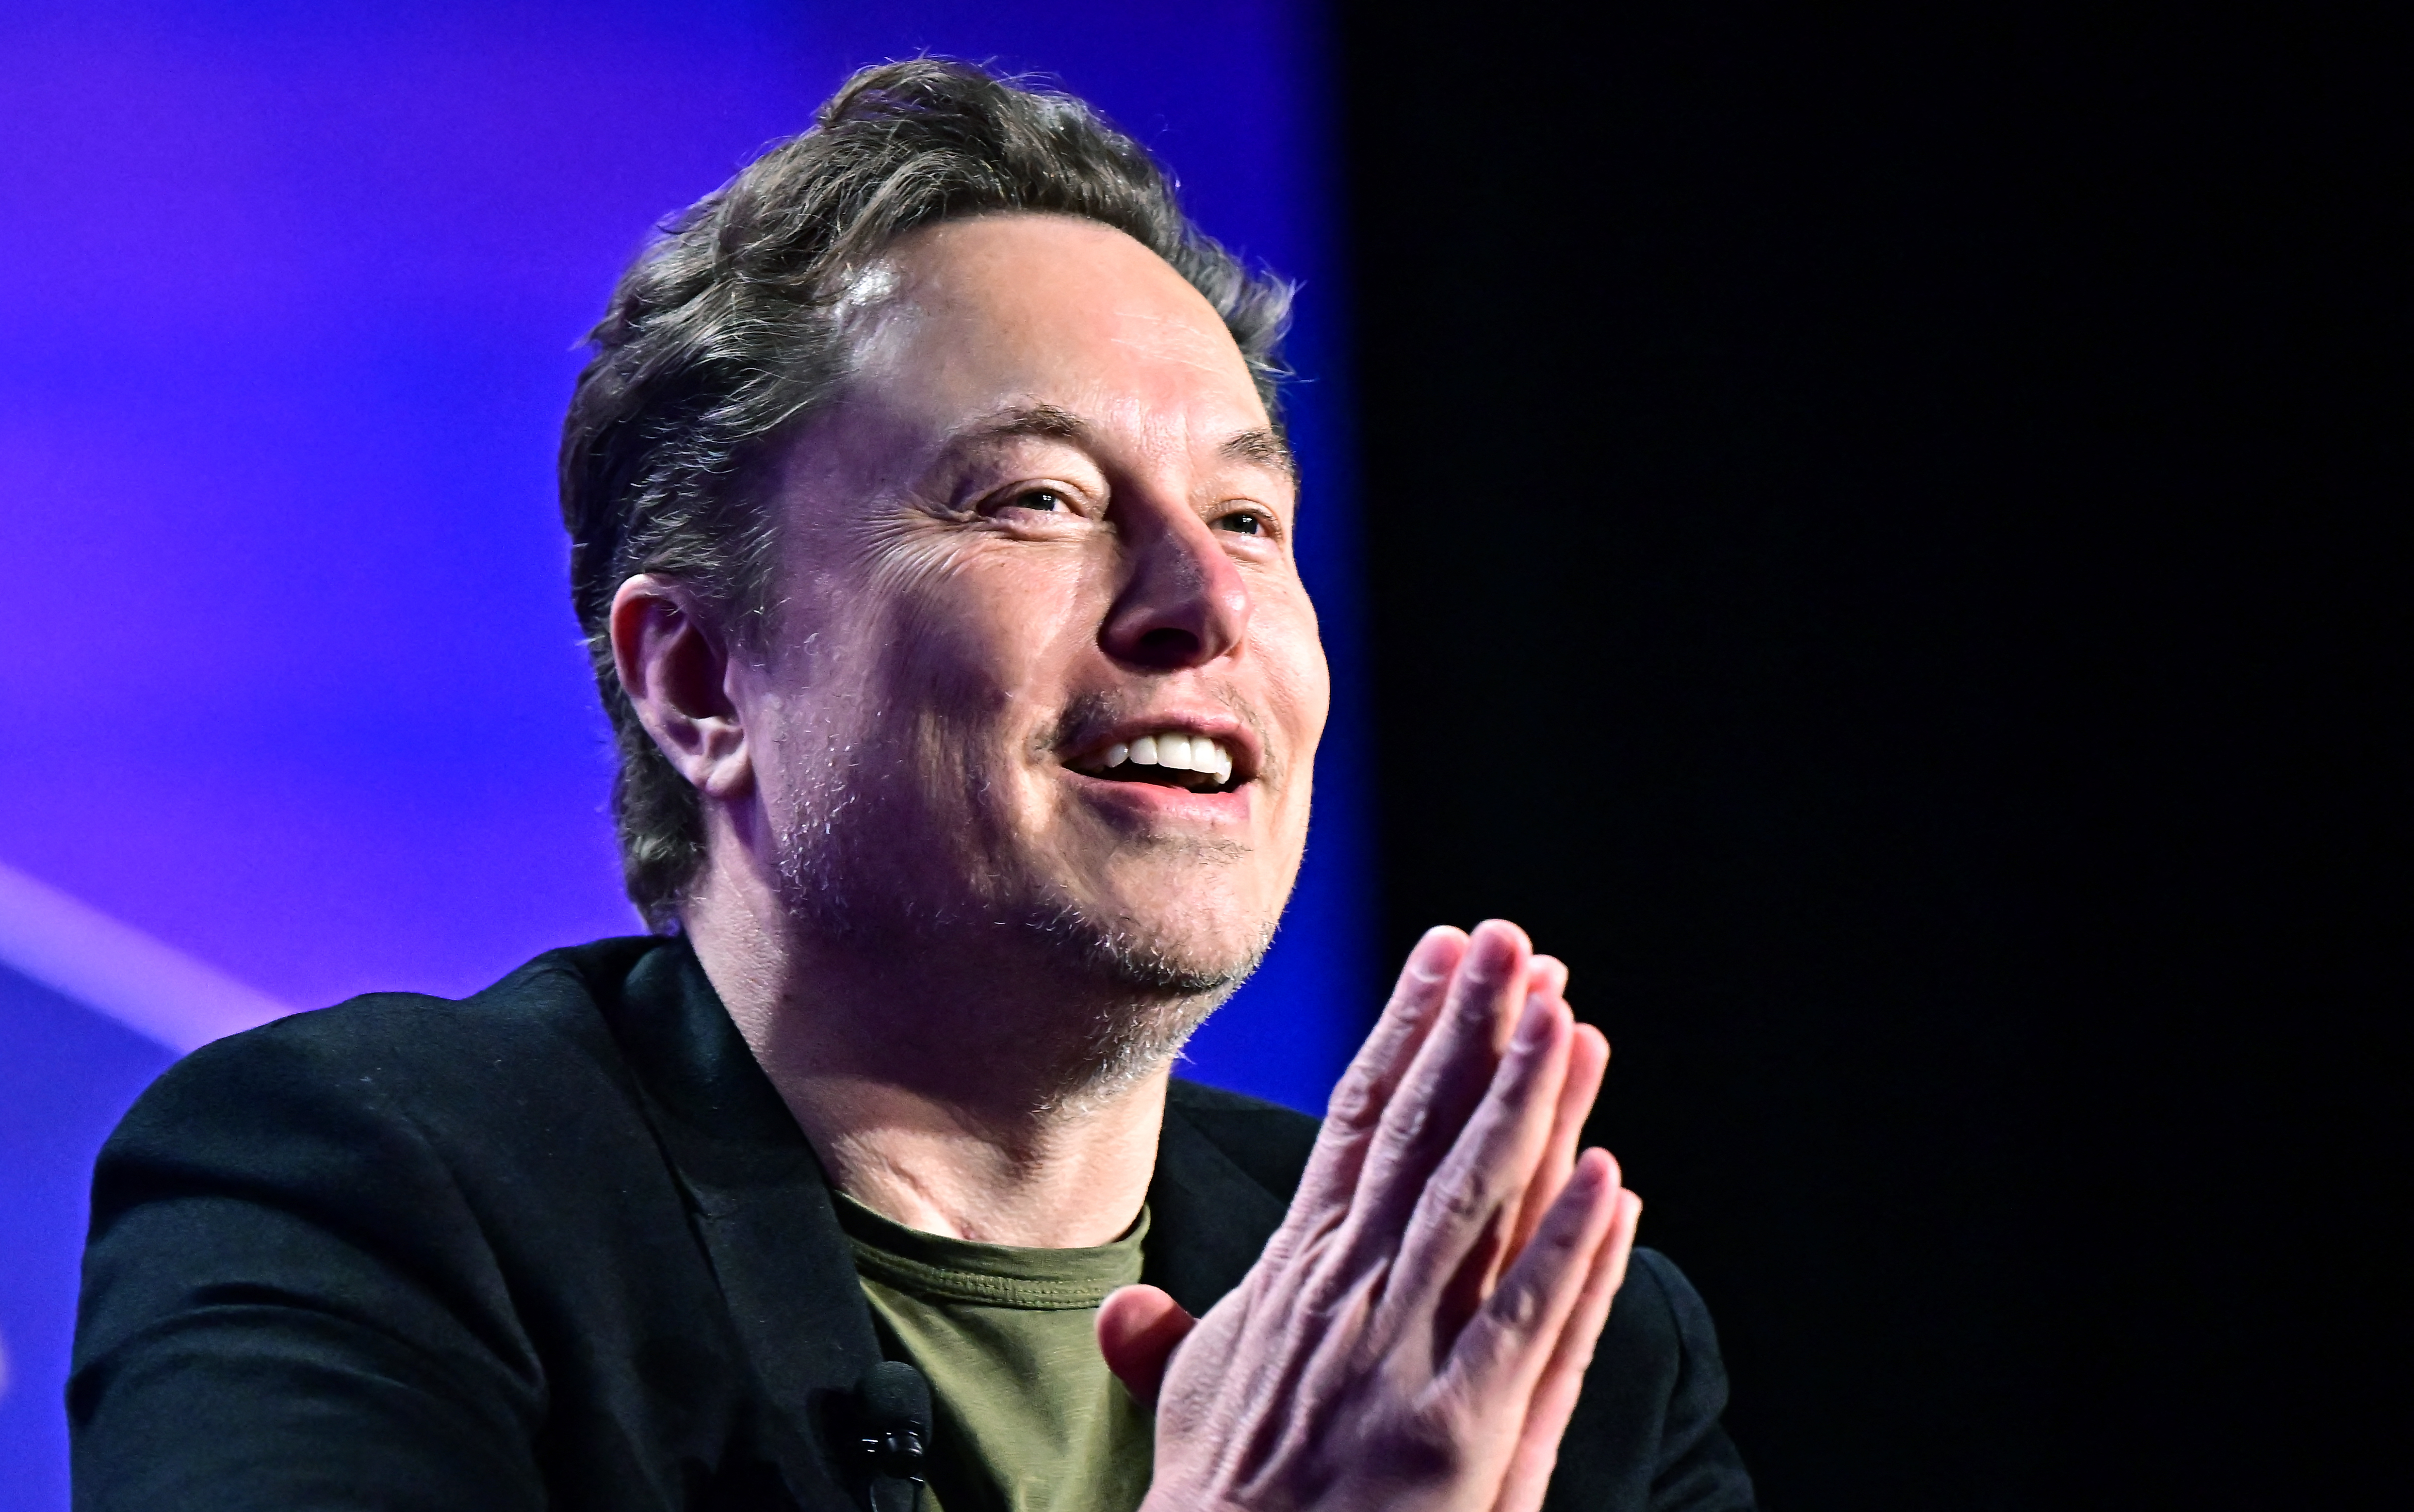 The beaming Tesla chief executive declared his love for all the stakeholders who helped him get the pay boost